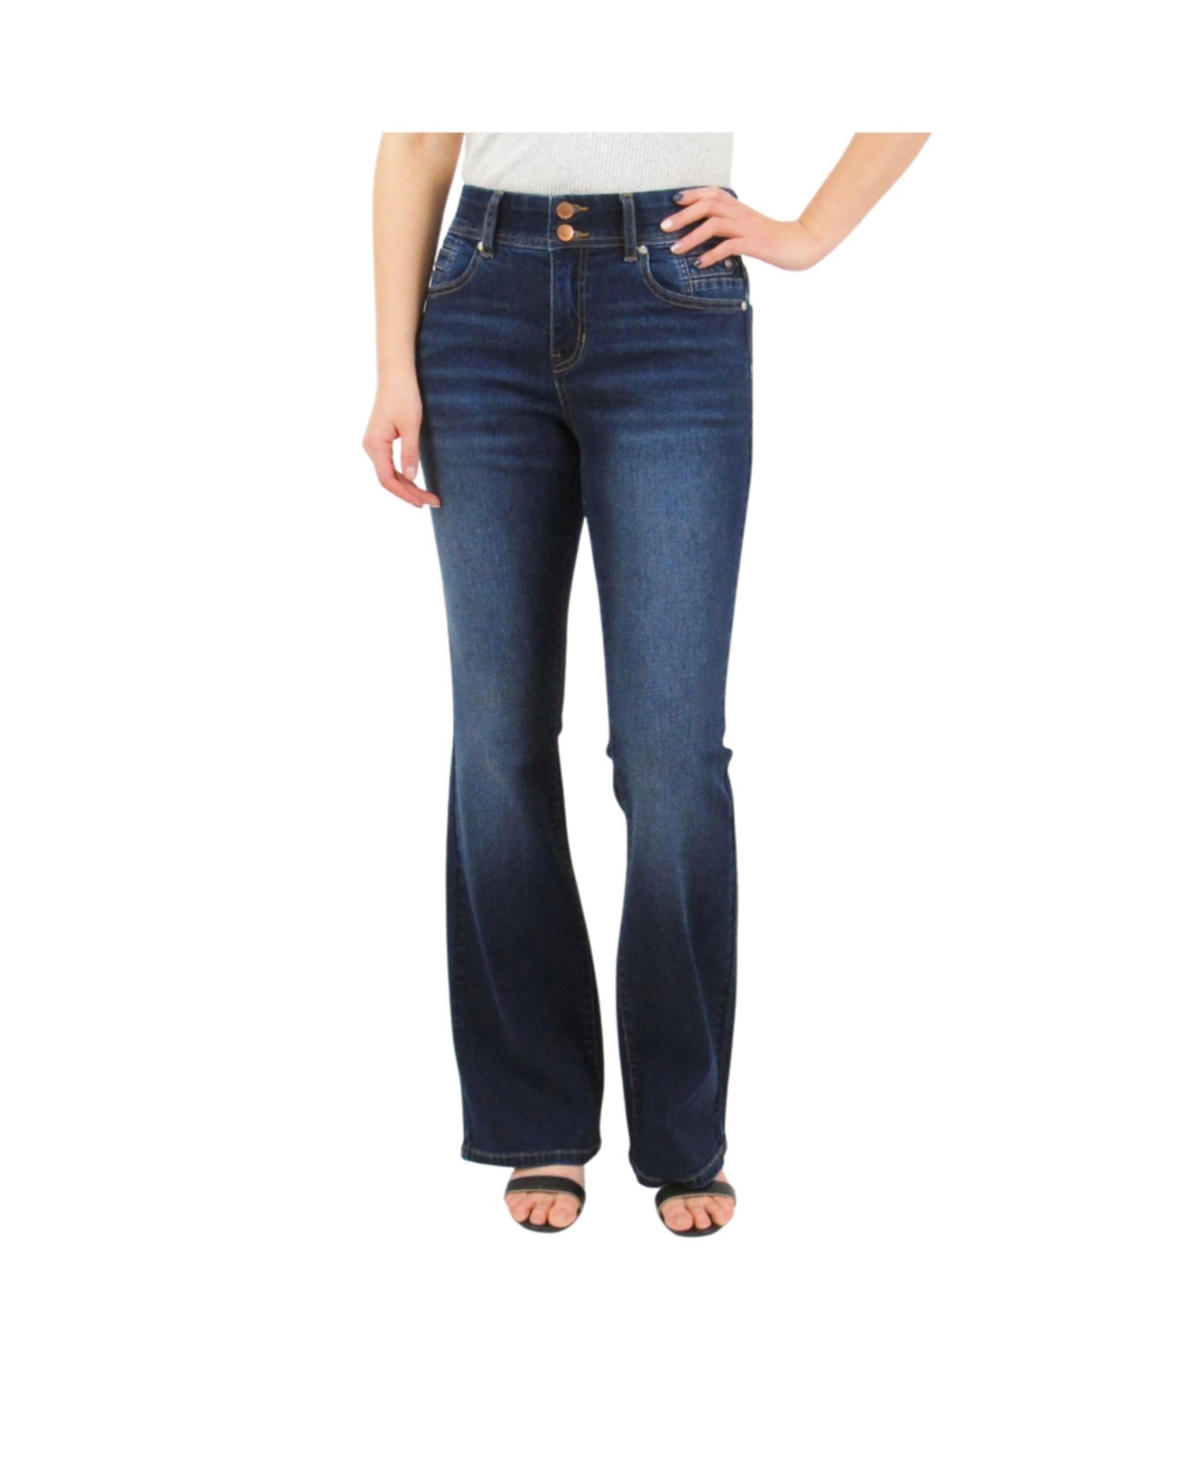 Maternity Postpartum Bootcut Jeans with front and back pocket detail Dark Wash - Dark wash